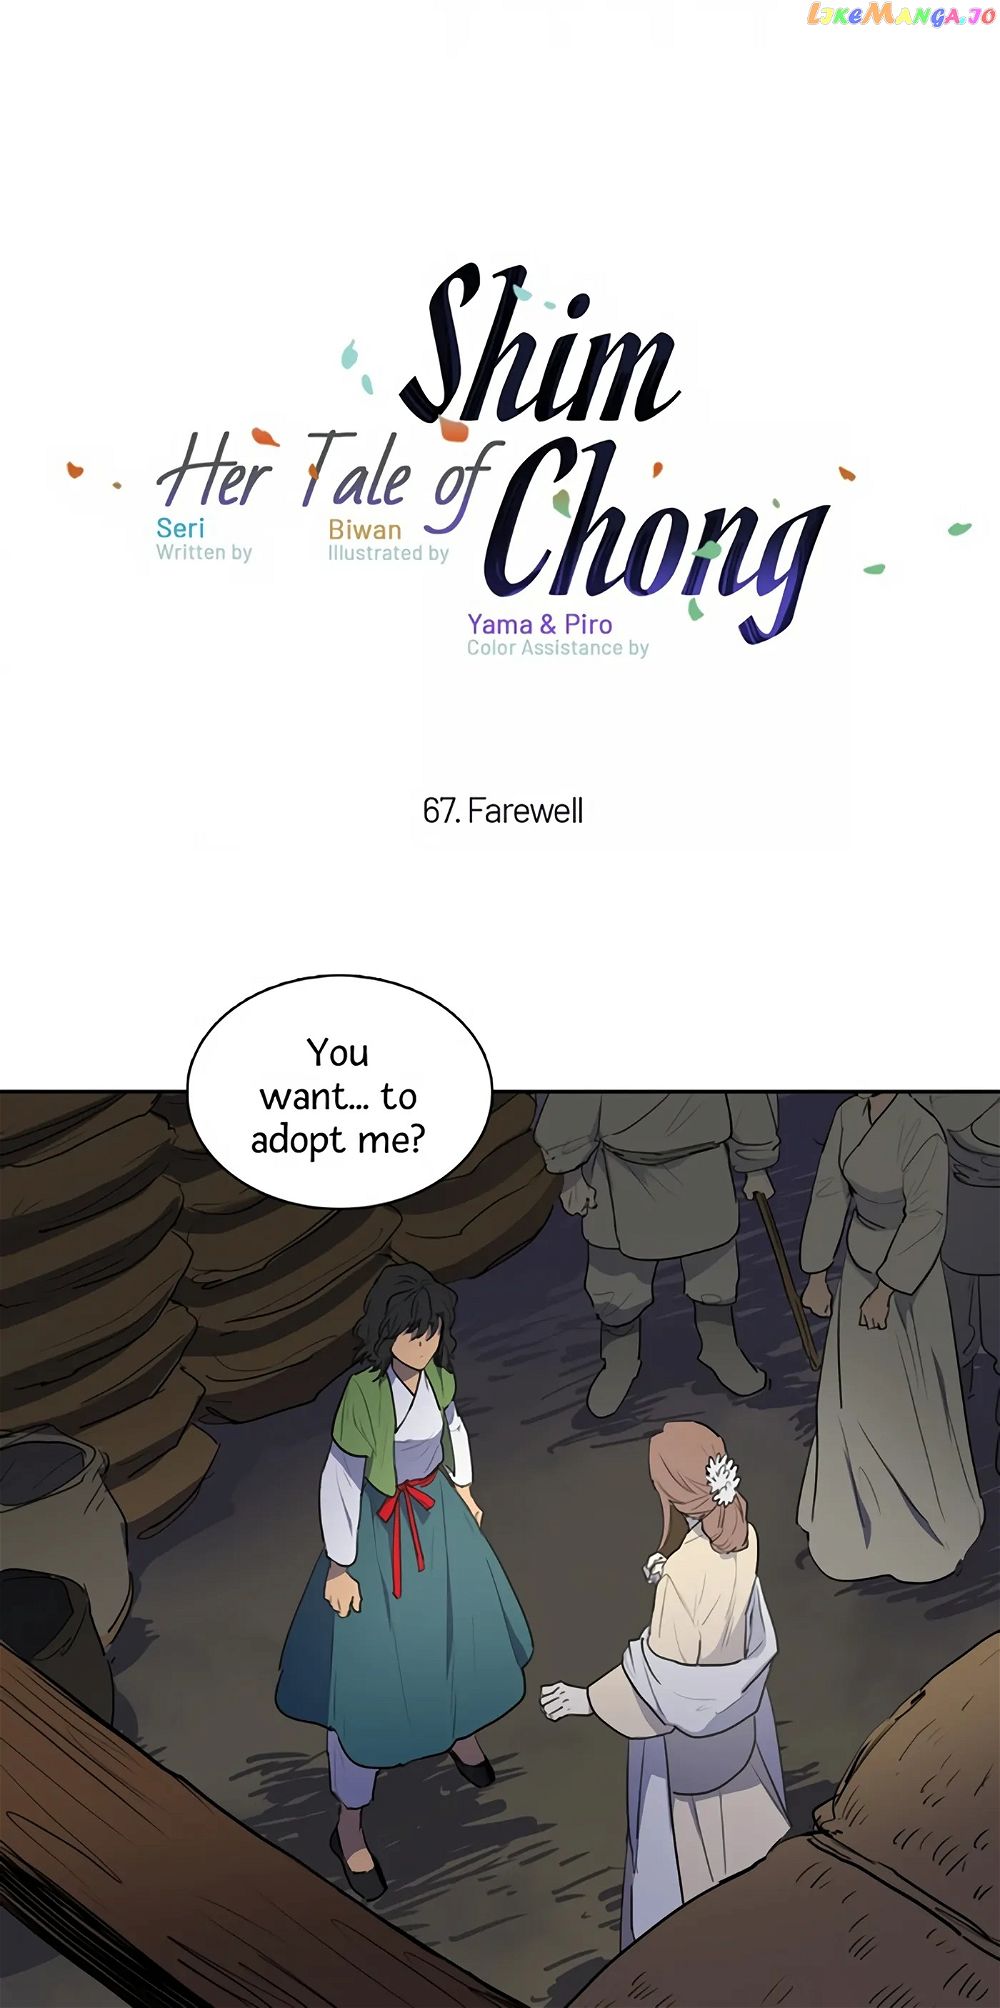 Her Tale of Shim Chong Chapter 67 - Page 1